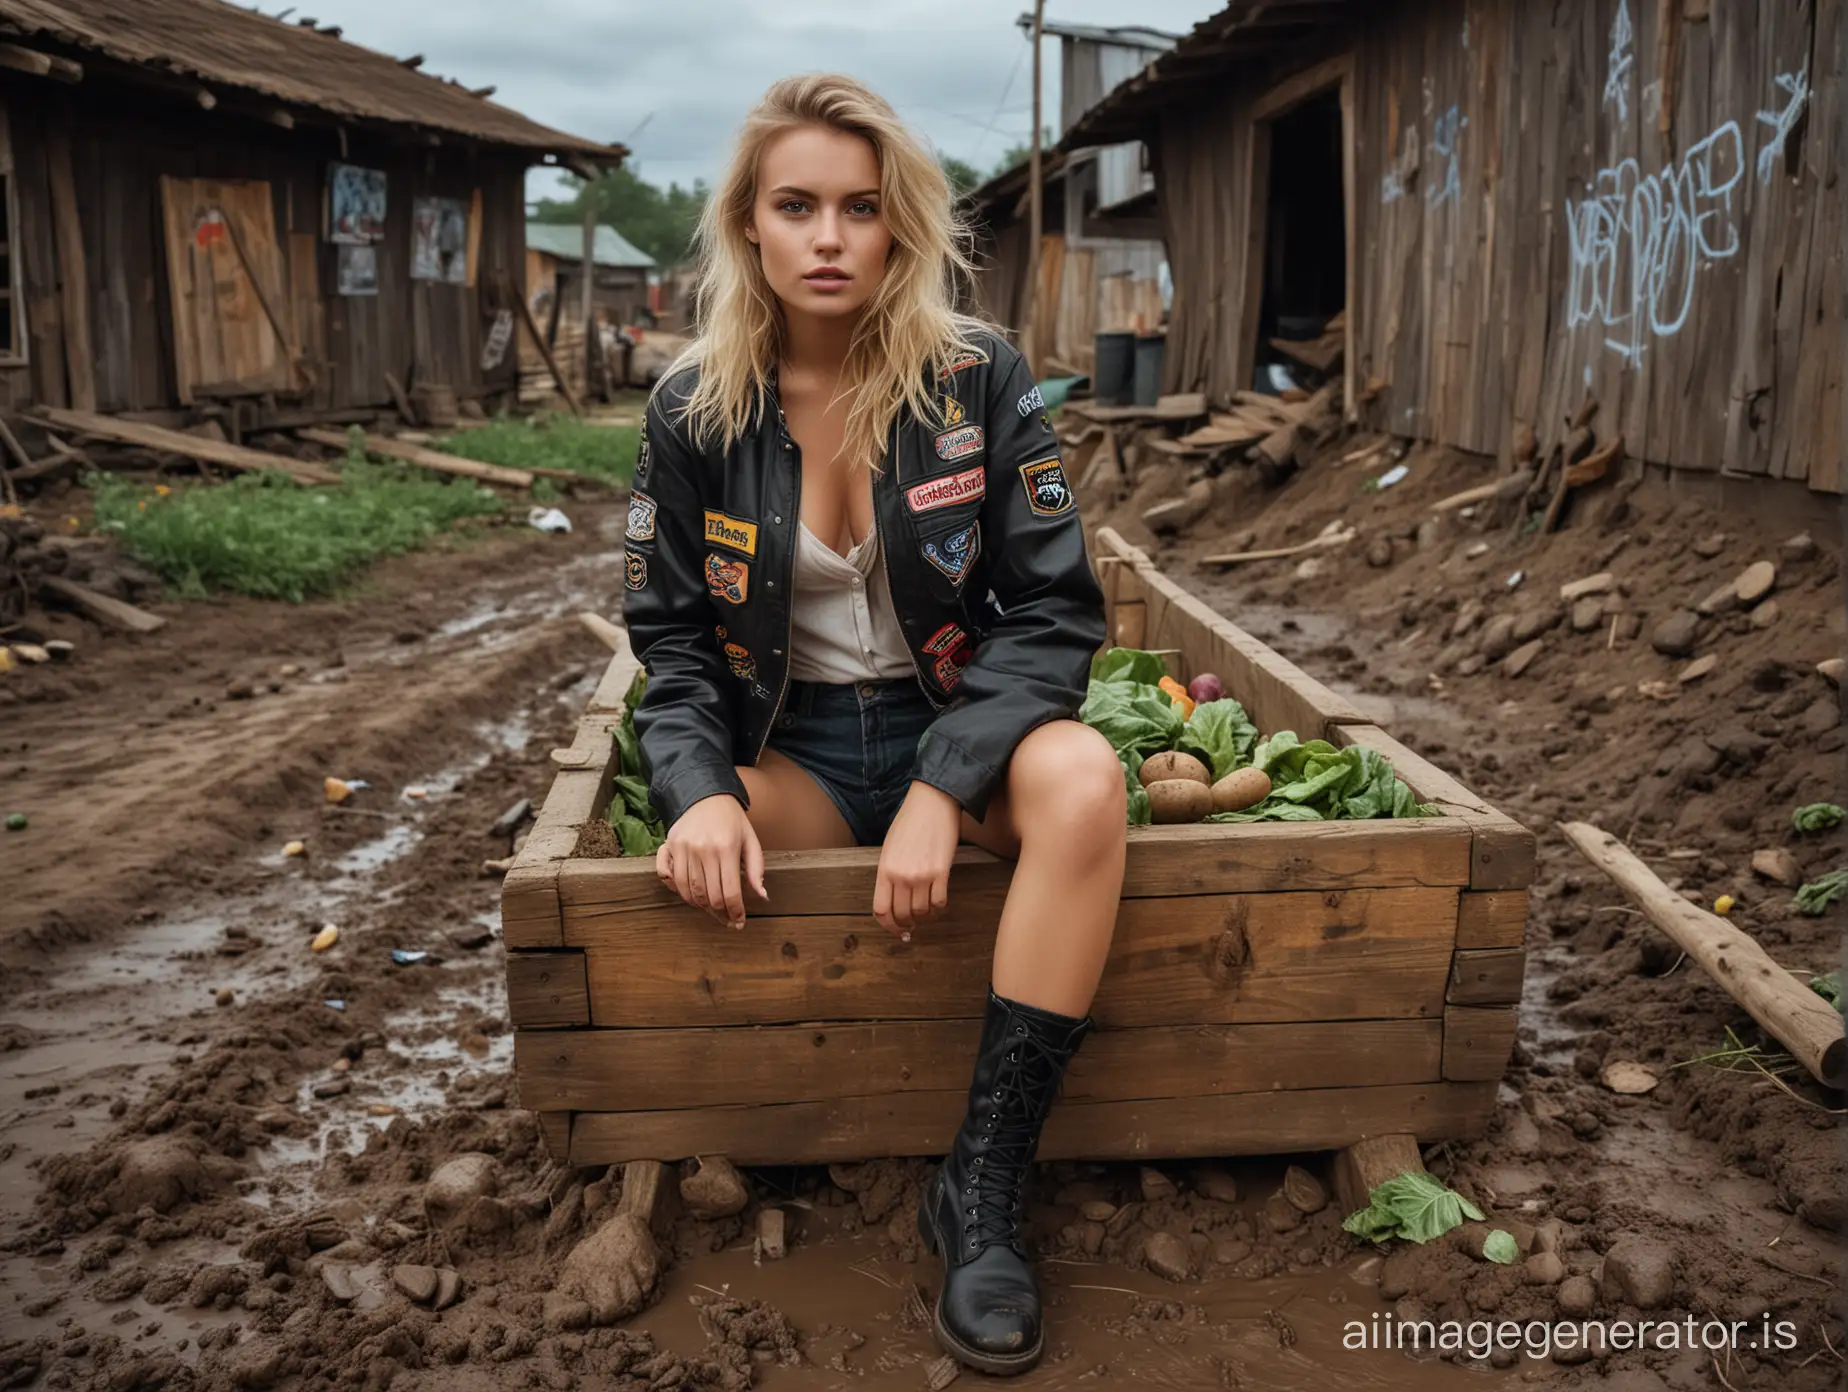 wide angle, blonde-haired young European woman with a wild and untamed look, dressed in attire reminiscent of a rebellious surfer. Her clothing is adorned with patches and graffiti-like designs. High suede black boots with thick heels. She exudes confidence and charisma, with a mischievous glint in her eye. Stirs food from potatoes and cabbage for animals in a wooden trough, in the mud in an old Russian village, at night. More detail.